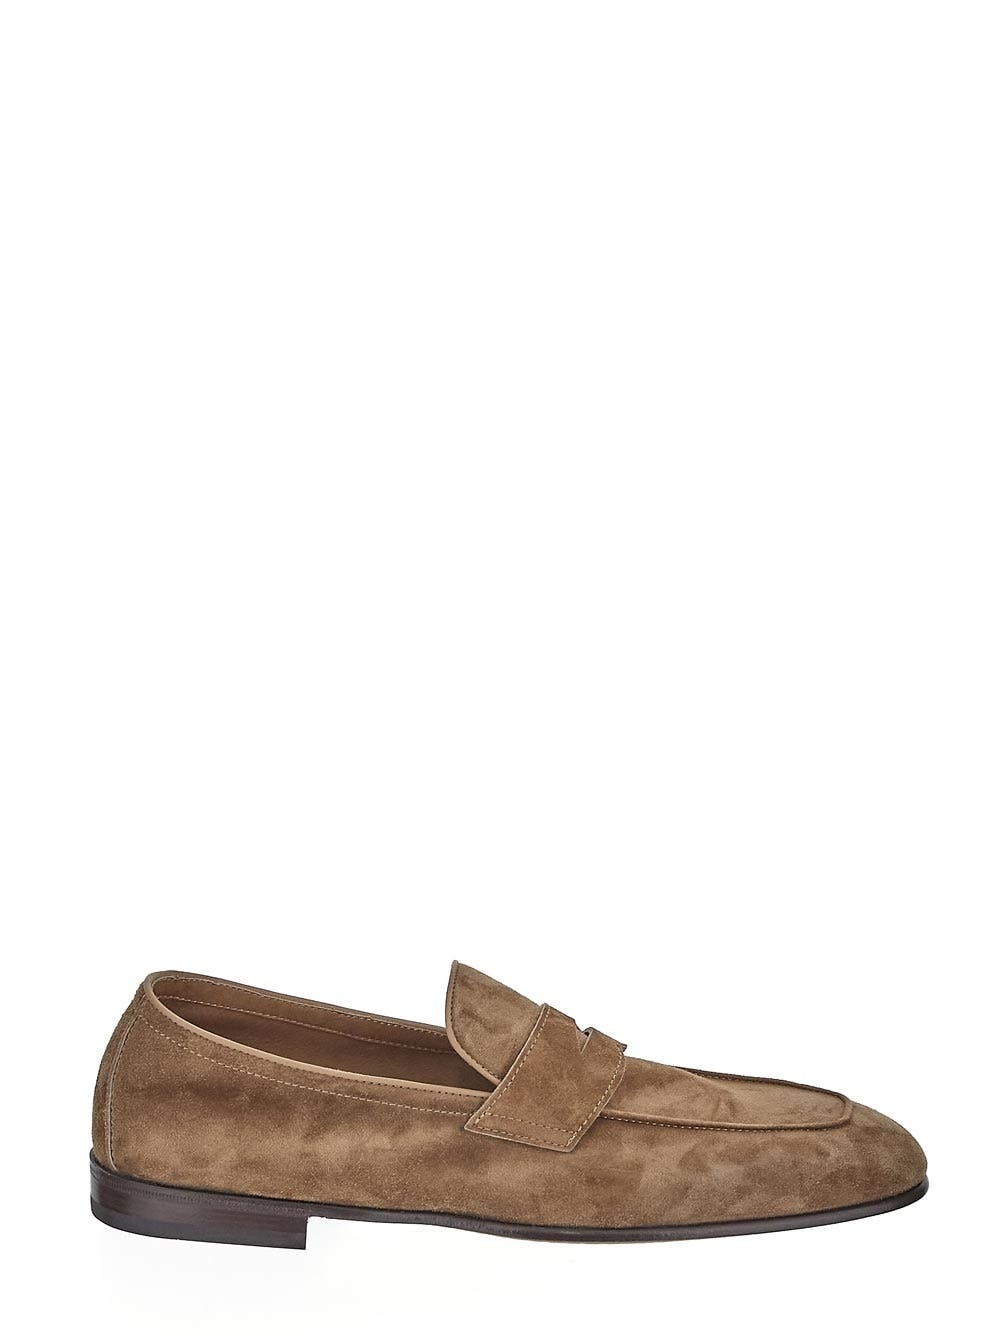 Photo: Brunello Cucinelli Unlined Penny Loafers